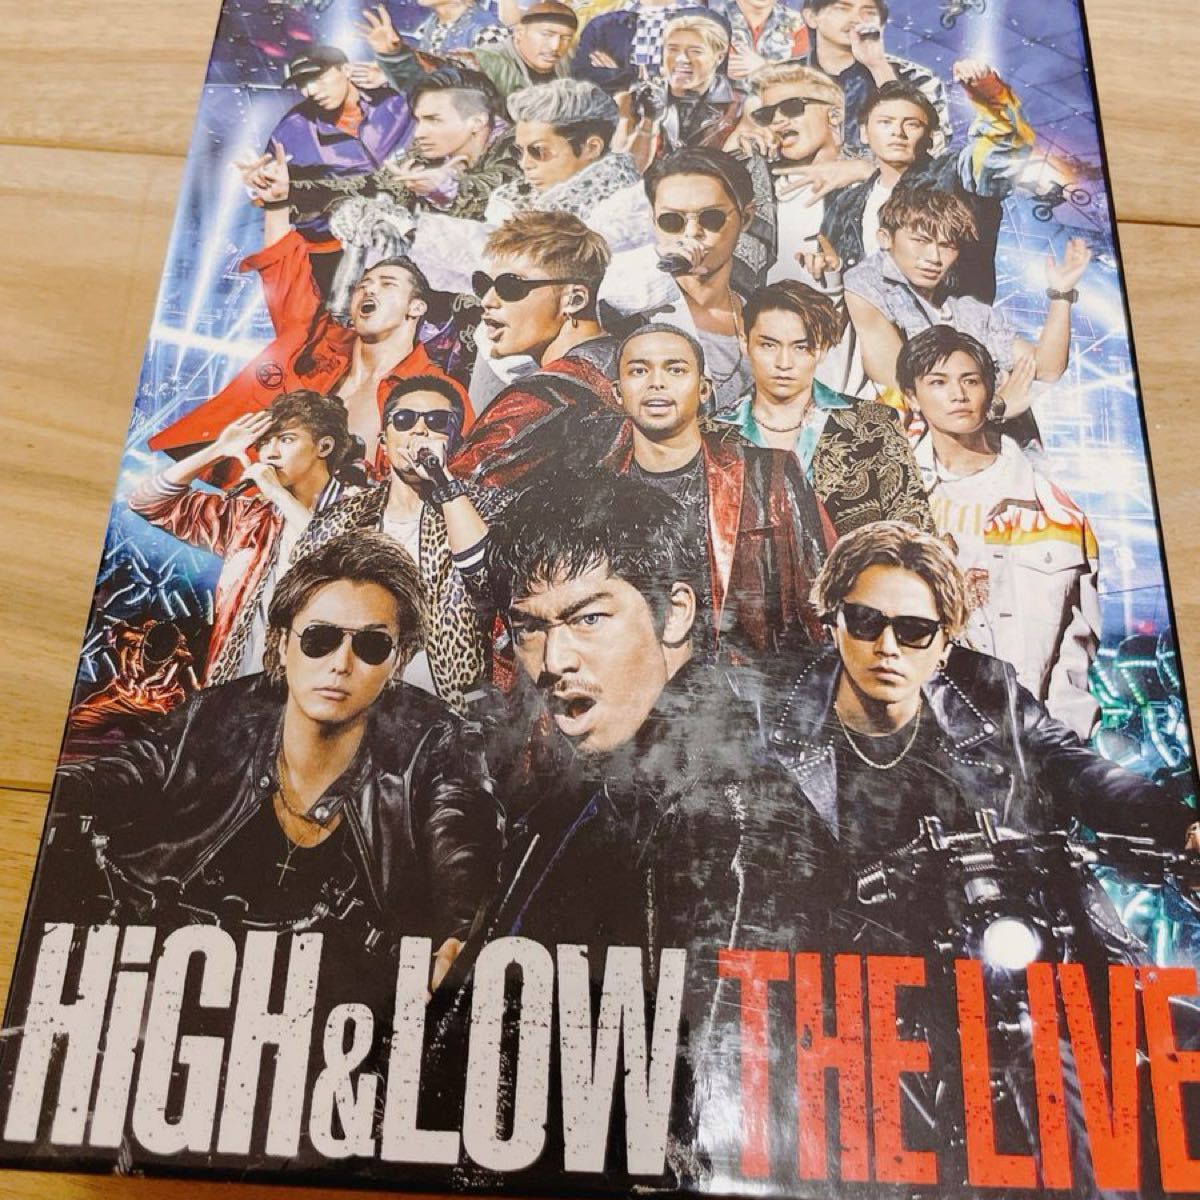 HiGH&LOW THE LIVE【初回限定盤】HiGH & LOW THE RED RAIN 【豪華盤】DVD 2点セット